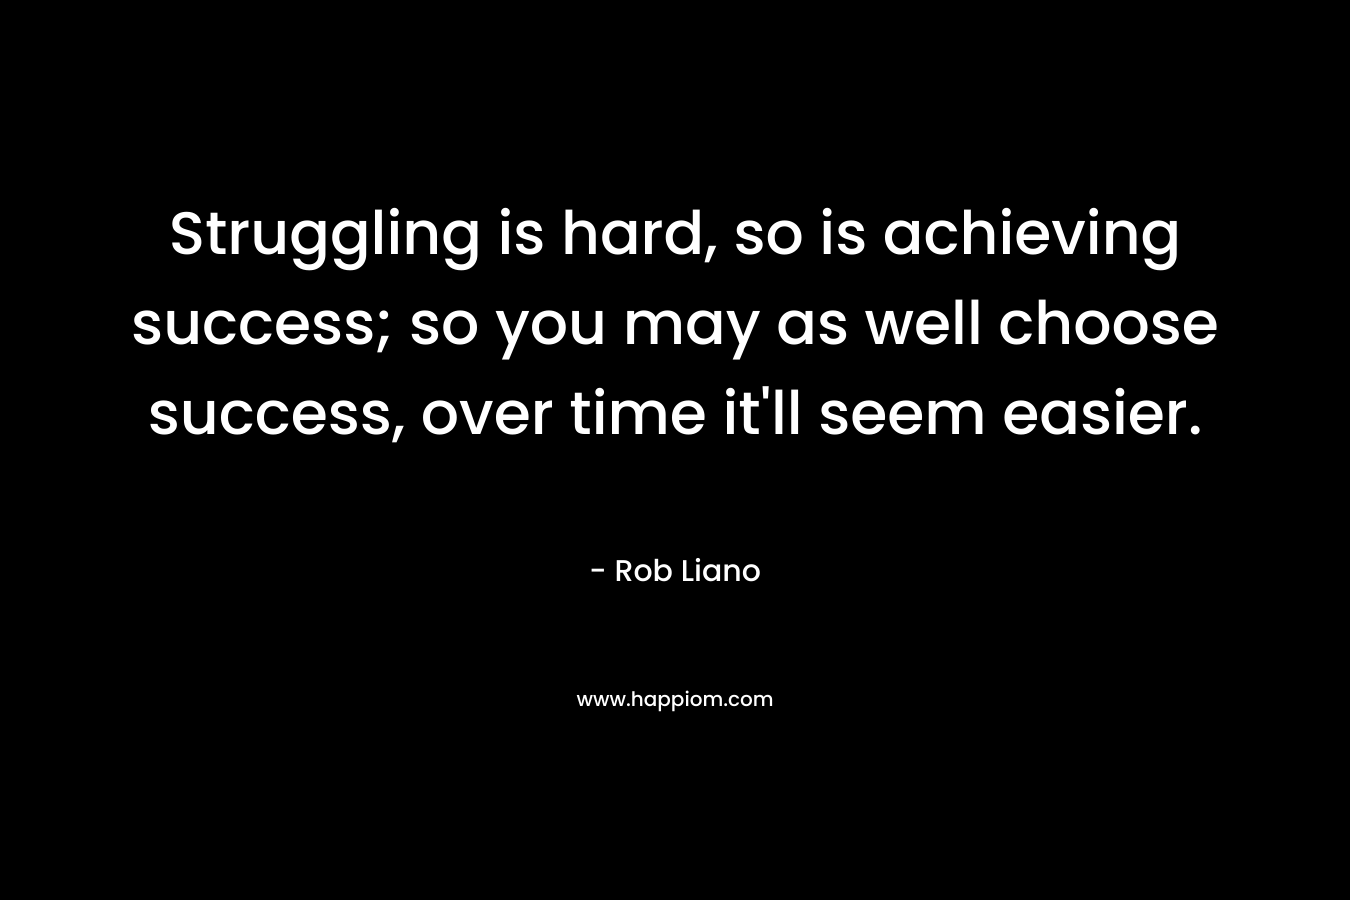 Struggling is hard, so is achieving success; so you may as well choose success, over time it'll seem easier.